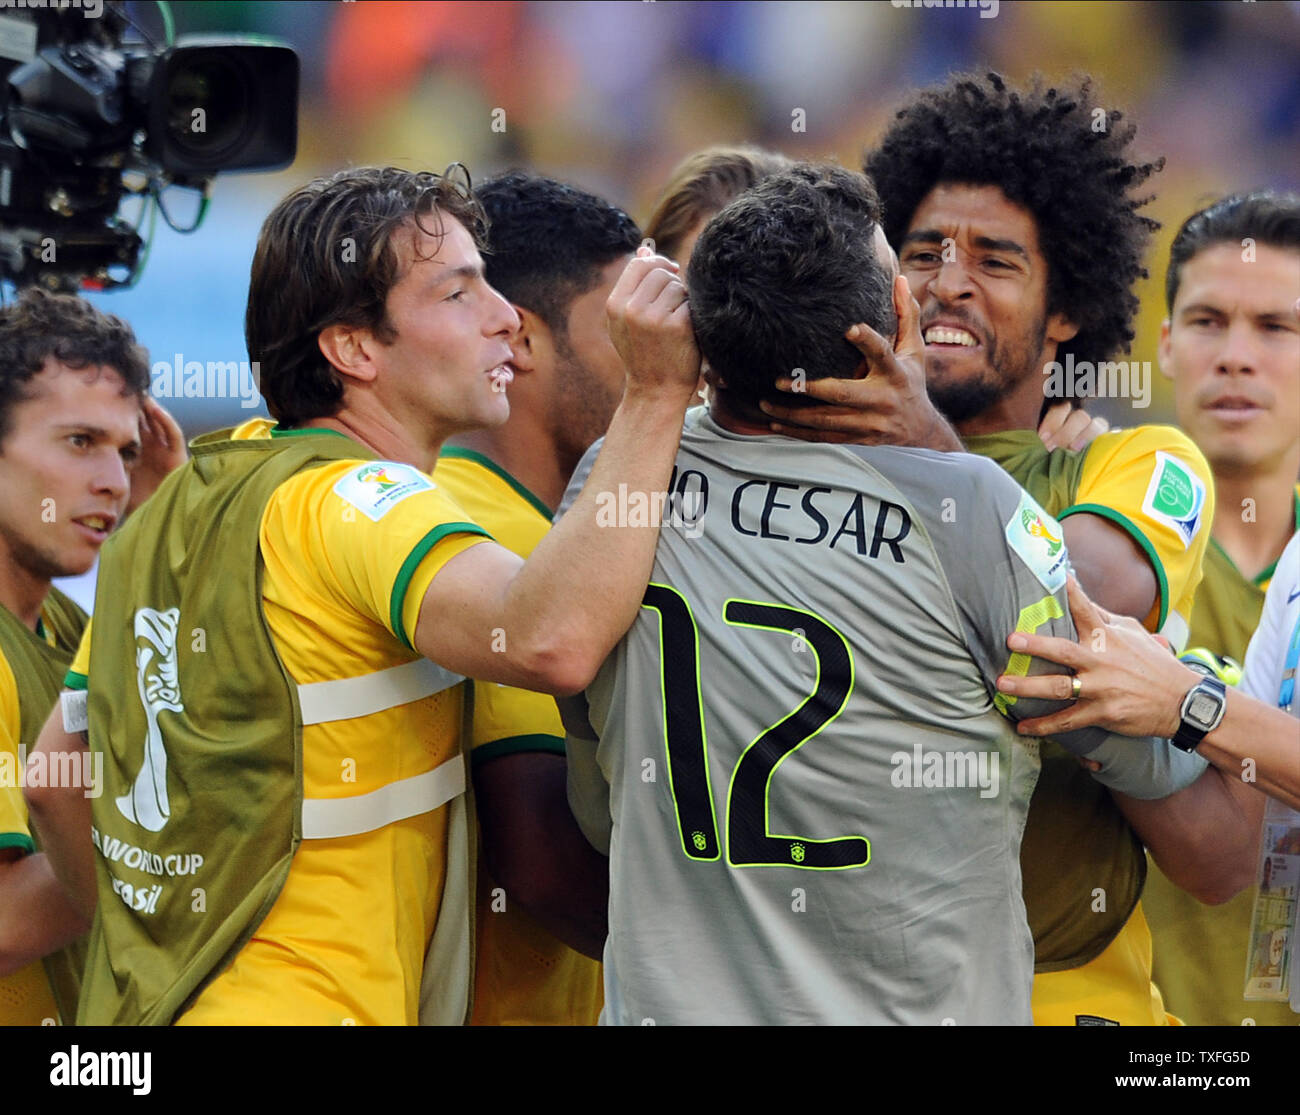 Julio Cesar of Brazil is congratulated by team-mate Dante following the 2014 FIFA World Cup Round of 16 match at the Estadio Mineirao in Belo Horizonte, Brazil on June 28, 2014. UPI/Chris Brunskill Stock Photo